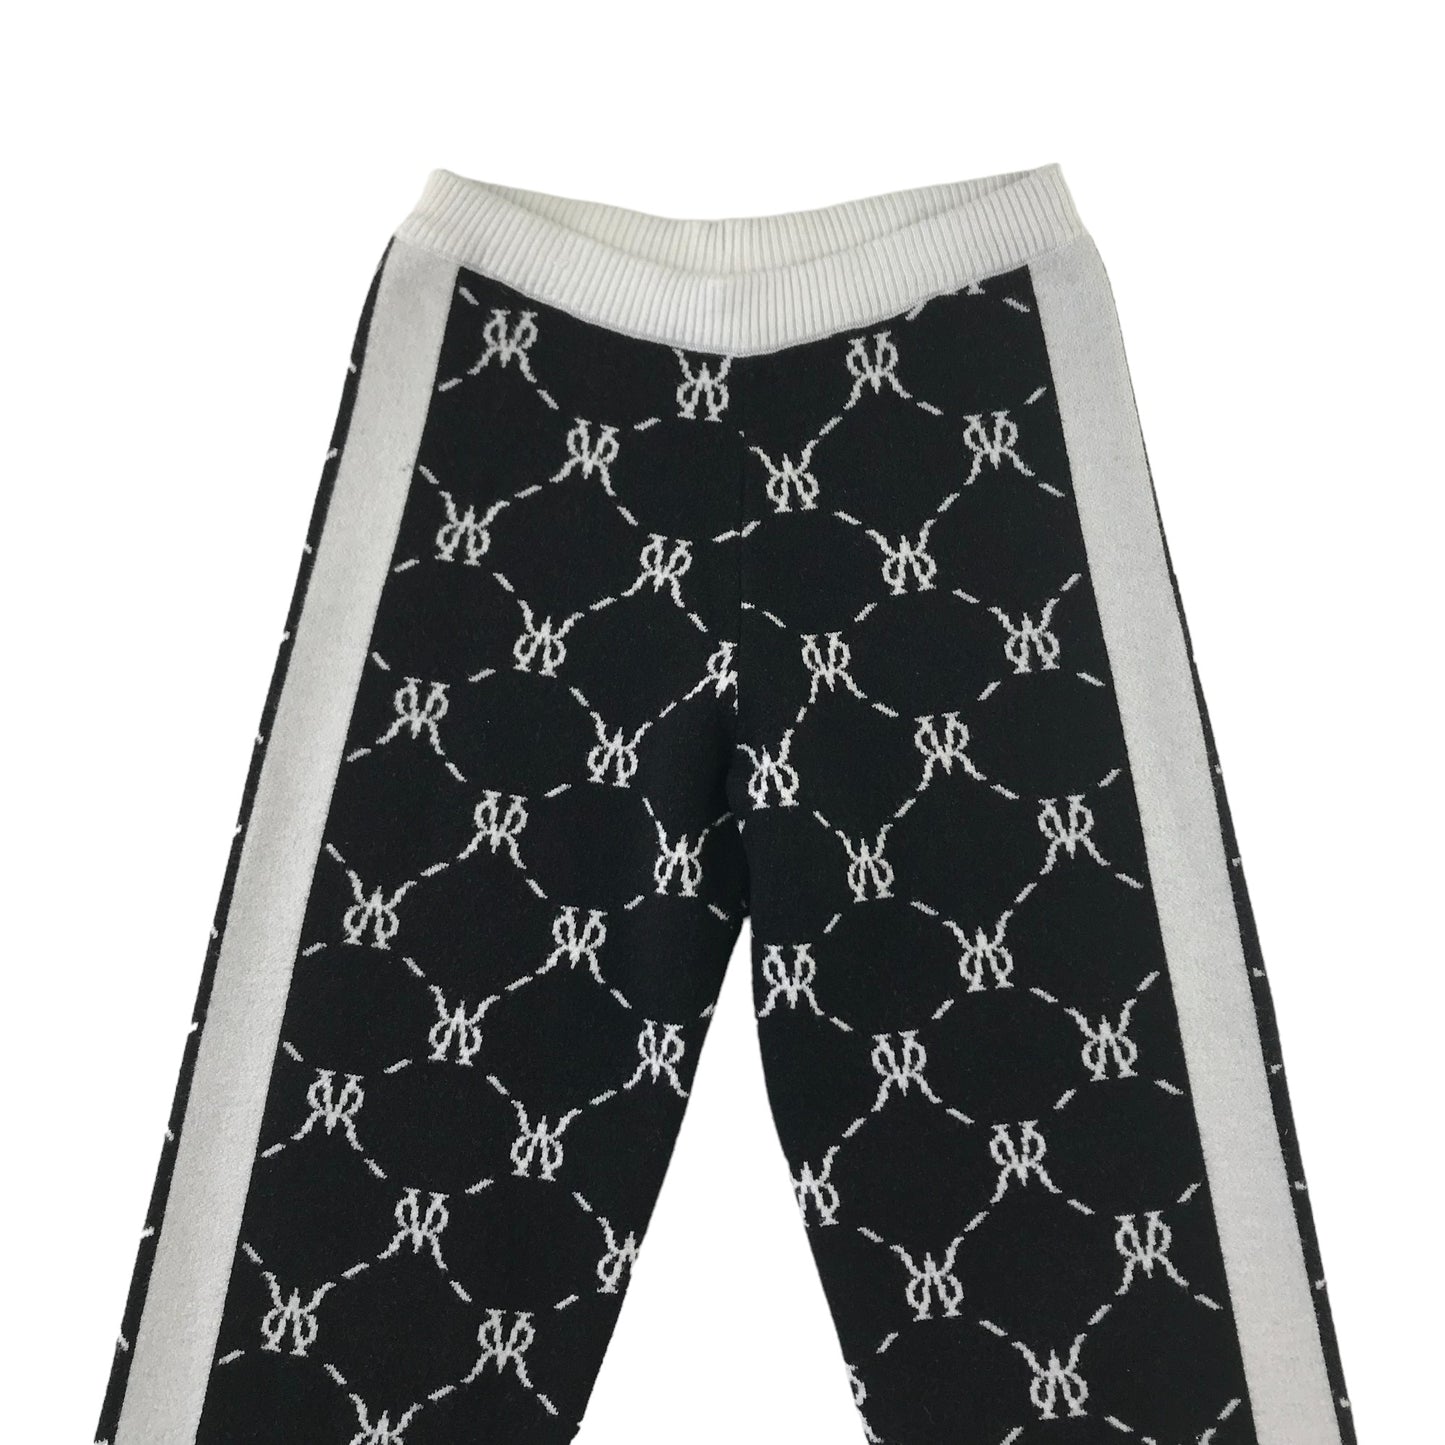 River Island Jumper and Joggers Set Age 11 Black and White Print Pattern